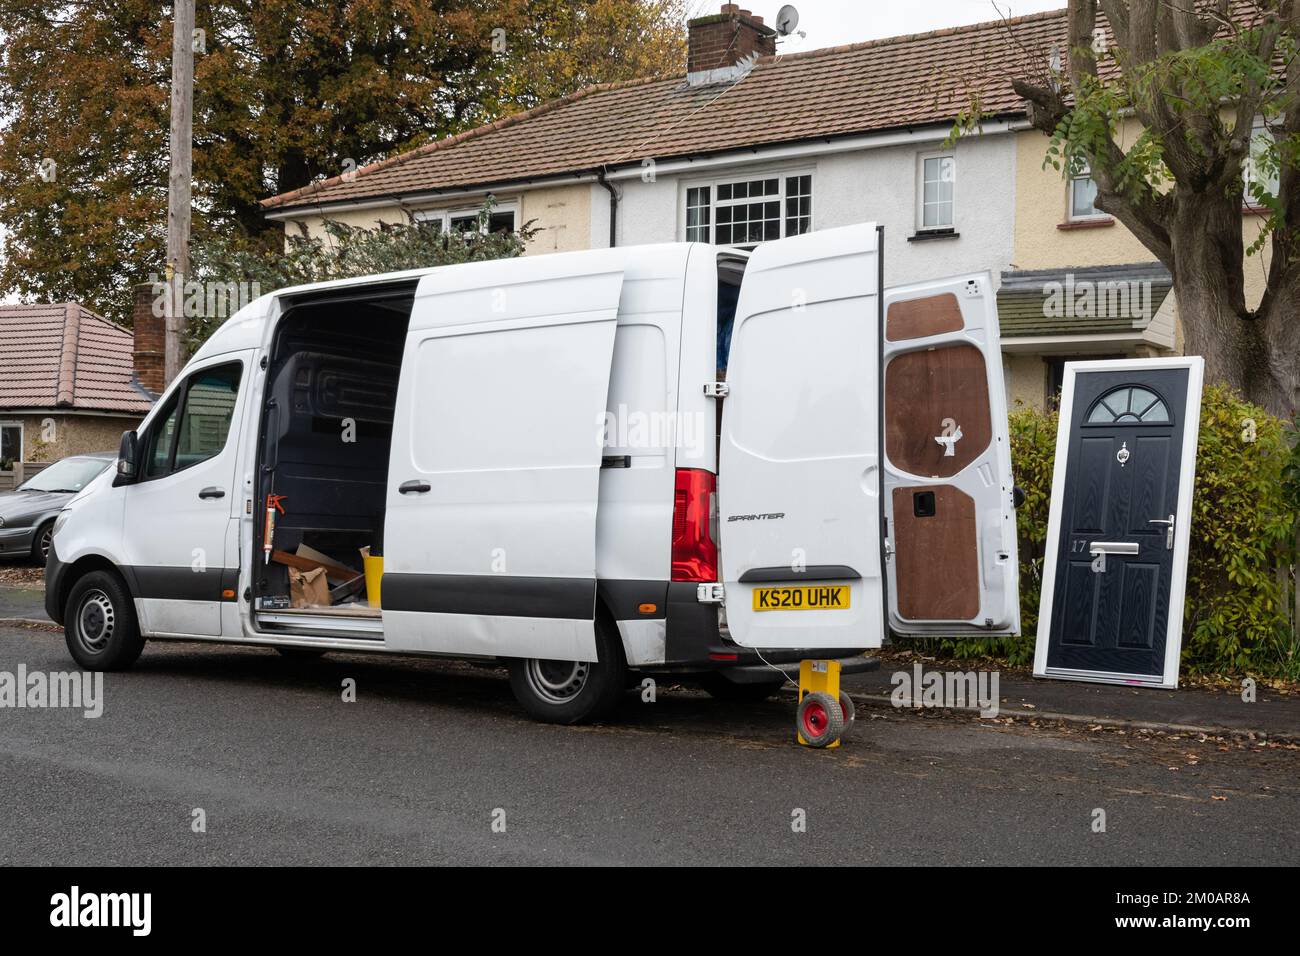 White van parked outside houses with a new replacement door ready to fit, UK Stock Photo